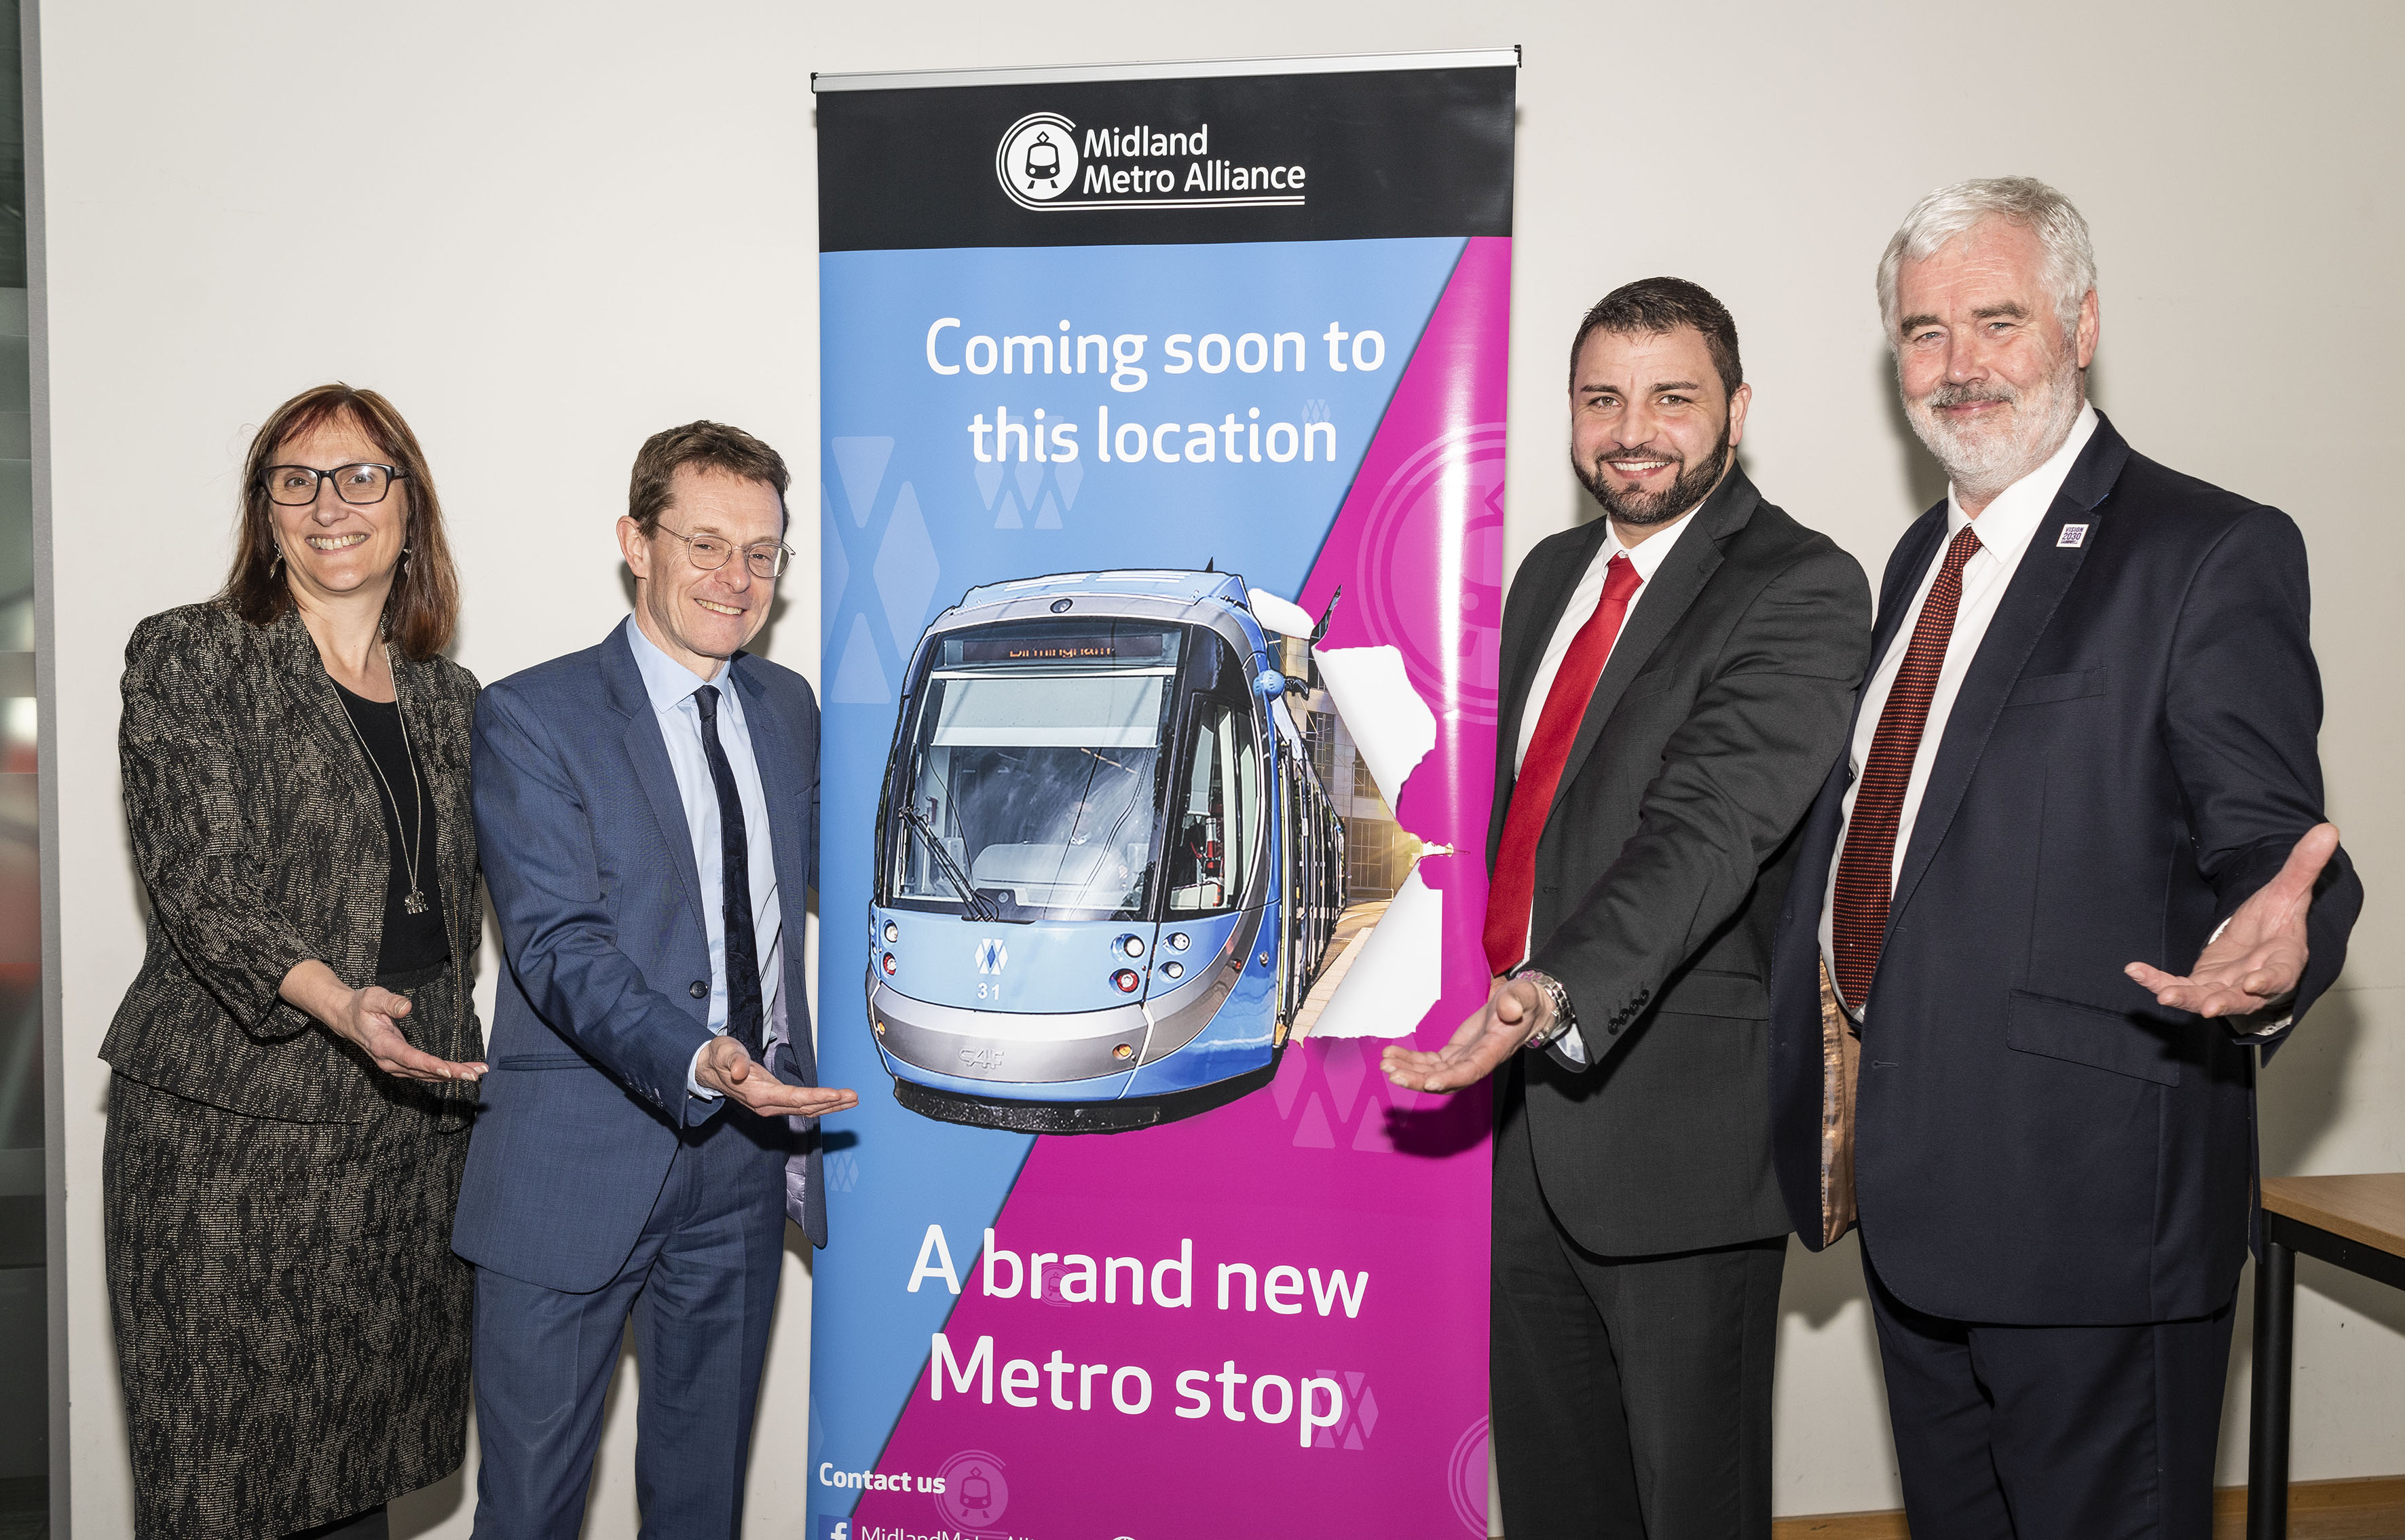 (from left to right) Sarah Norman, chief executive of Dudley Council, Mayor of the West Midlands Andy Street, Cllr Qadar Zada, leader of Dudley Council, and Cllr Steve Trow, leader of Sandwell Borough Council, celebrate the approval of funding for the Wednesbury to Brierley Hill Metro